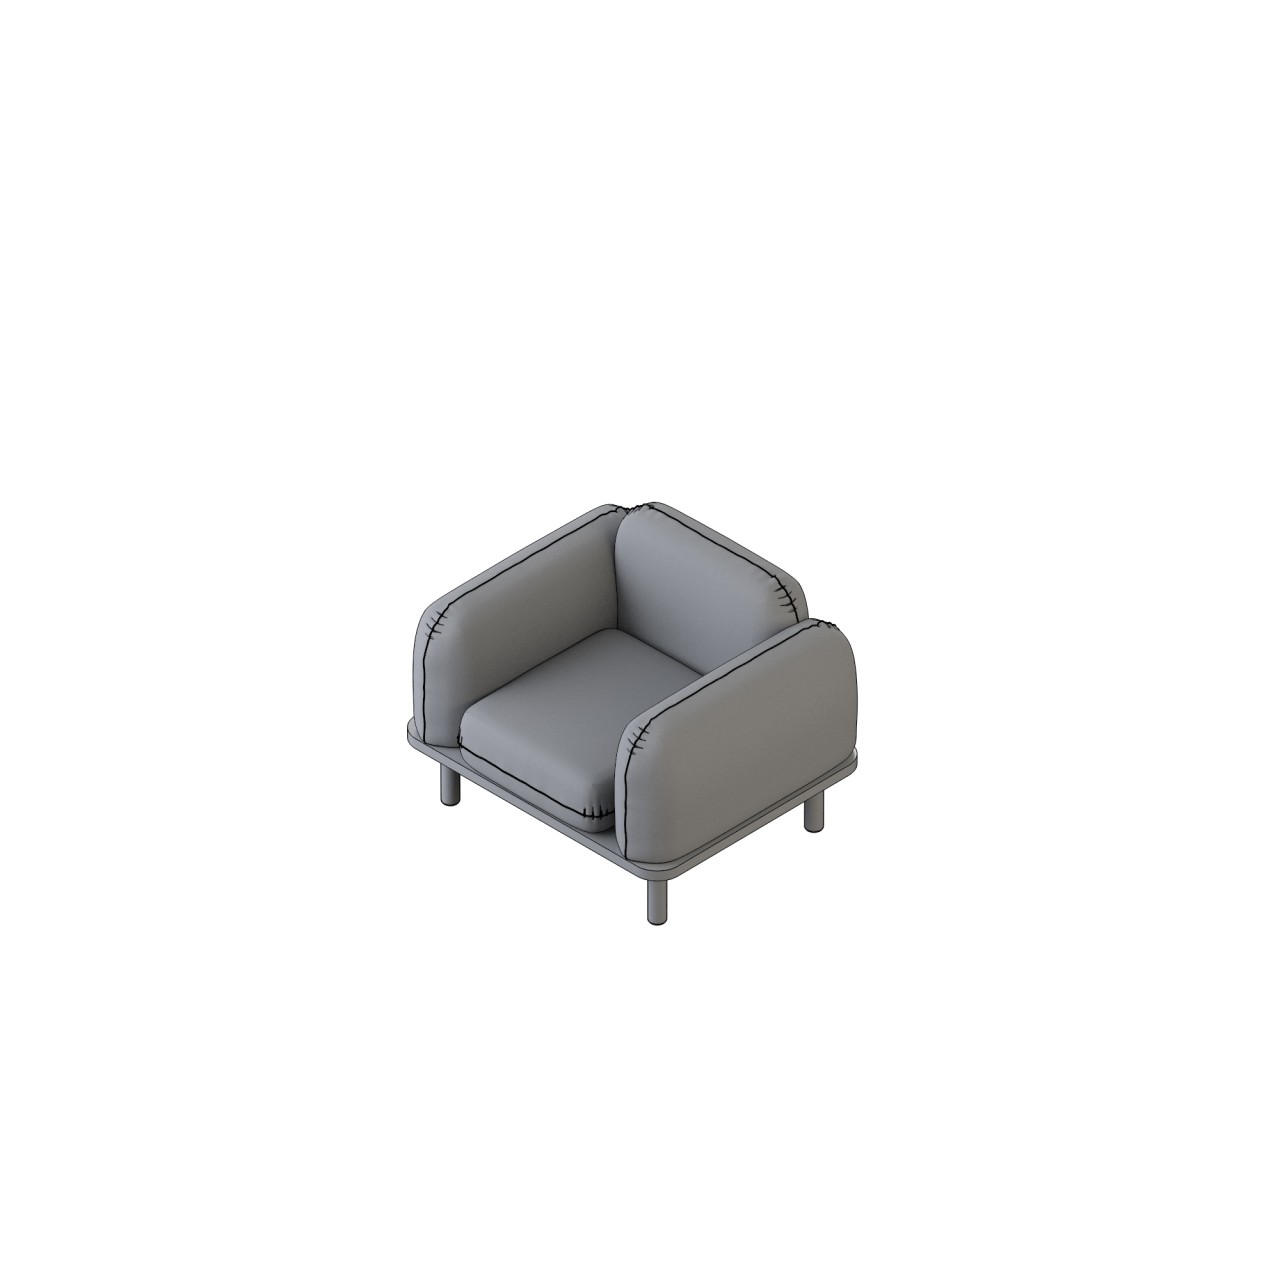 Soft - 24001
one seat with arms
COM 5.75
arms 2.75, back 1.25,
base 1, seat 1.75